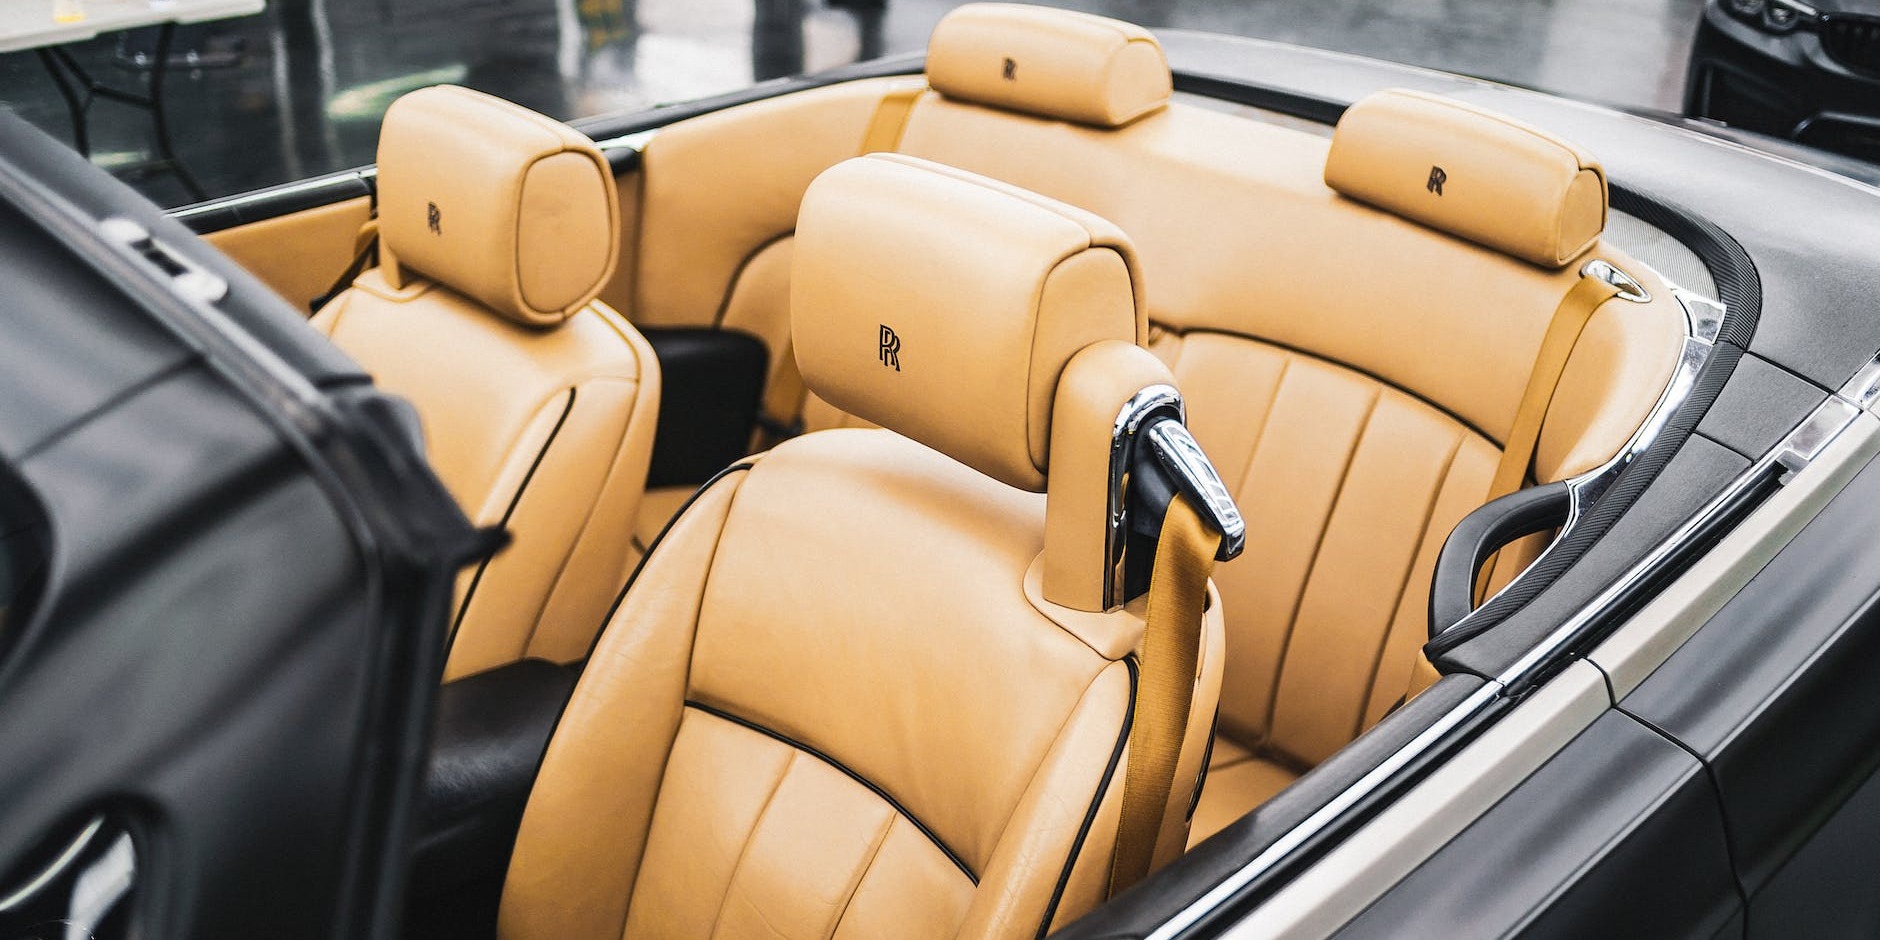 Why the Rolls Royce Phantom Is the Ultimate Luxury Experience for Your Pateley Bridge Wedding